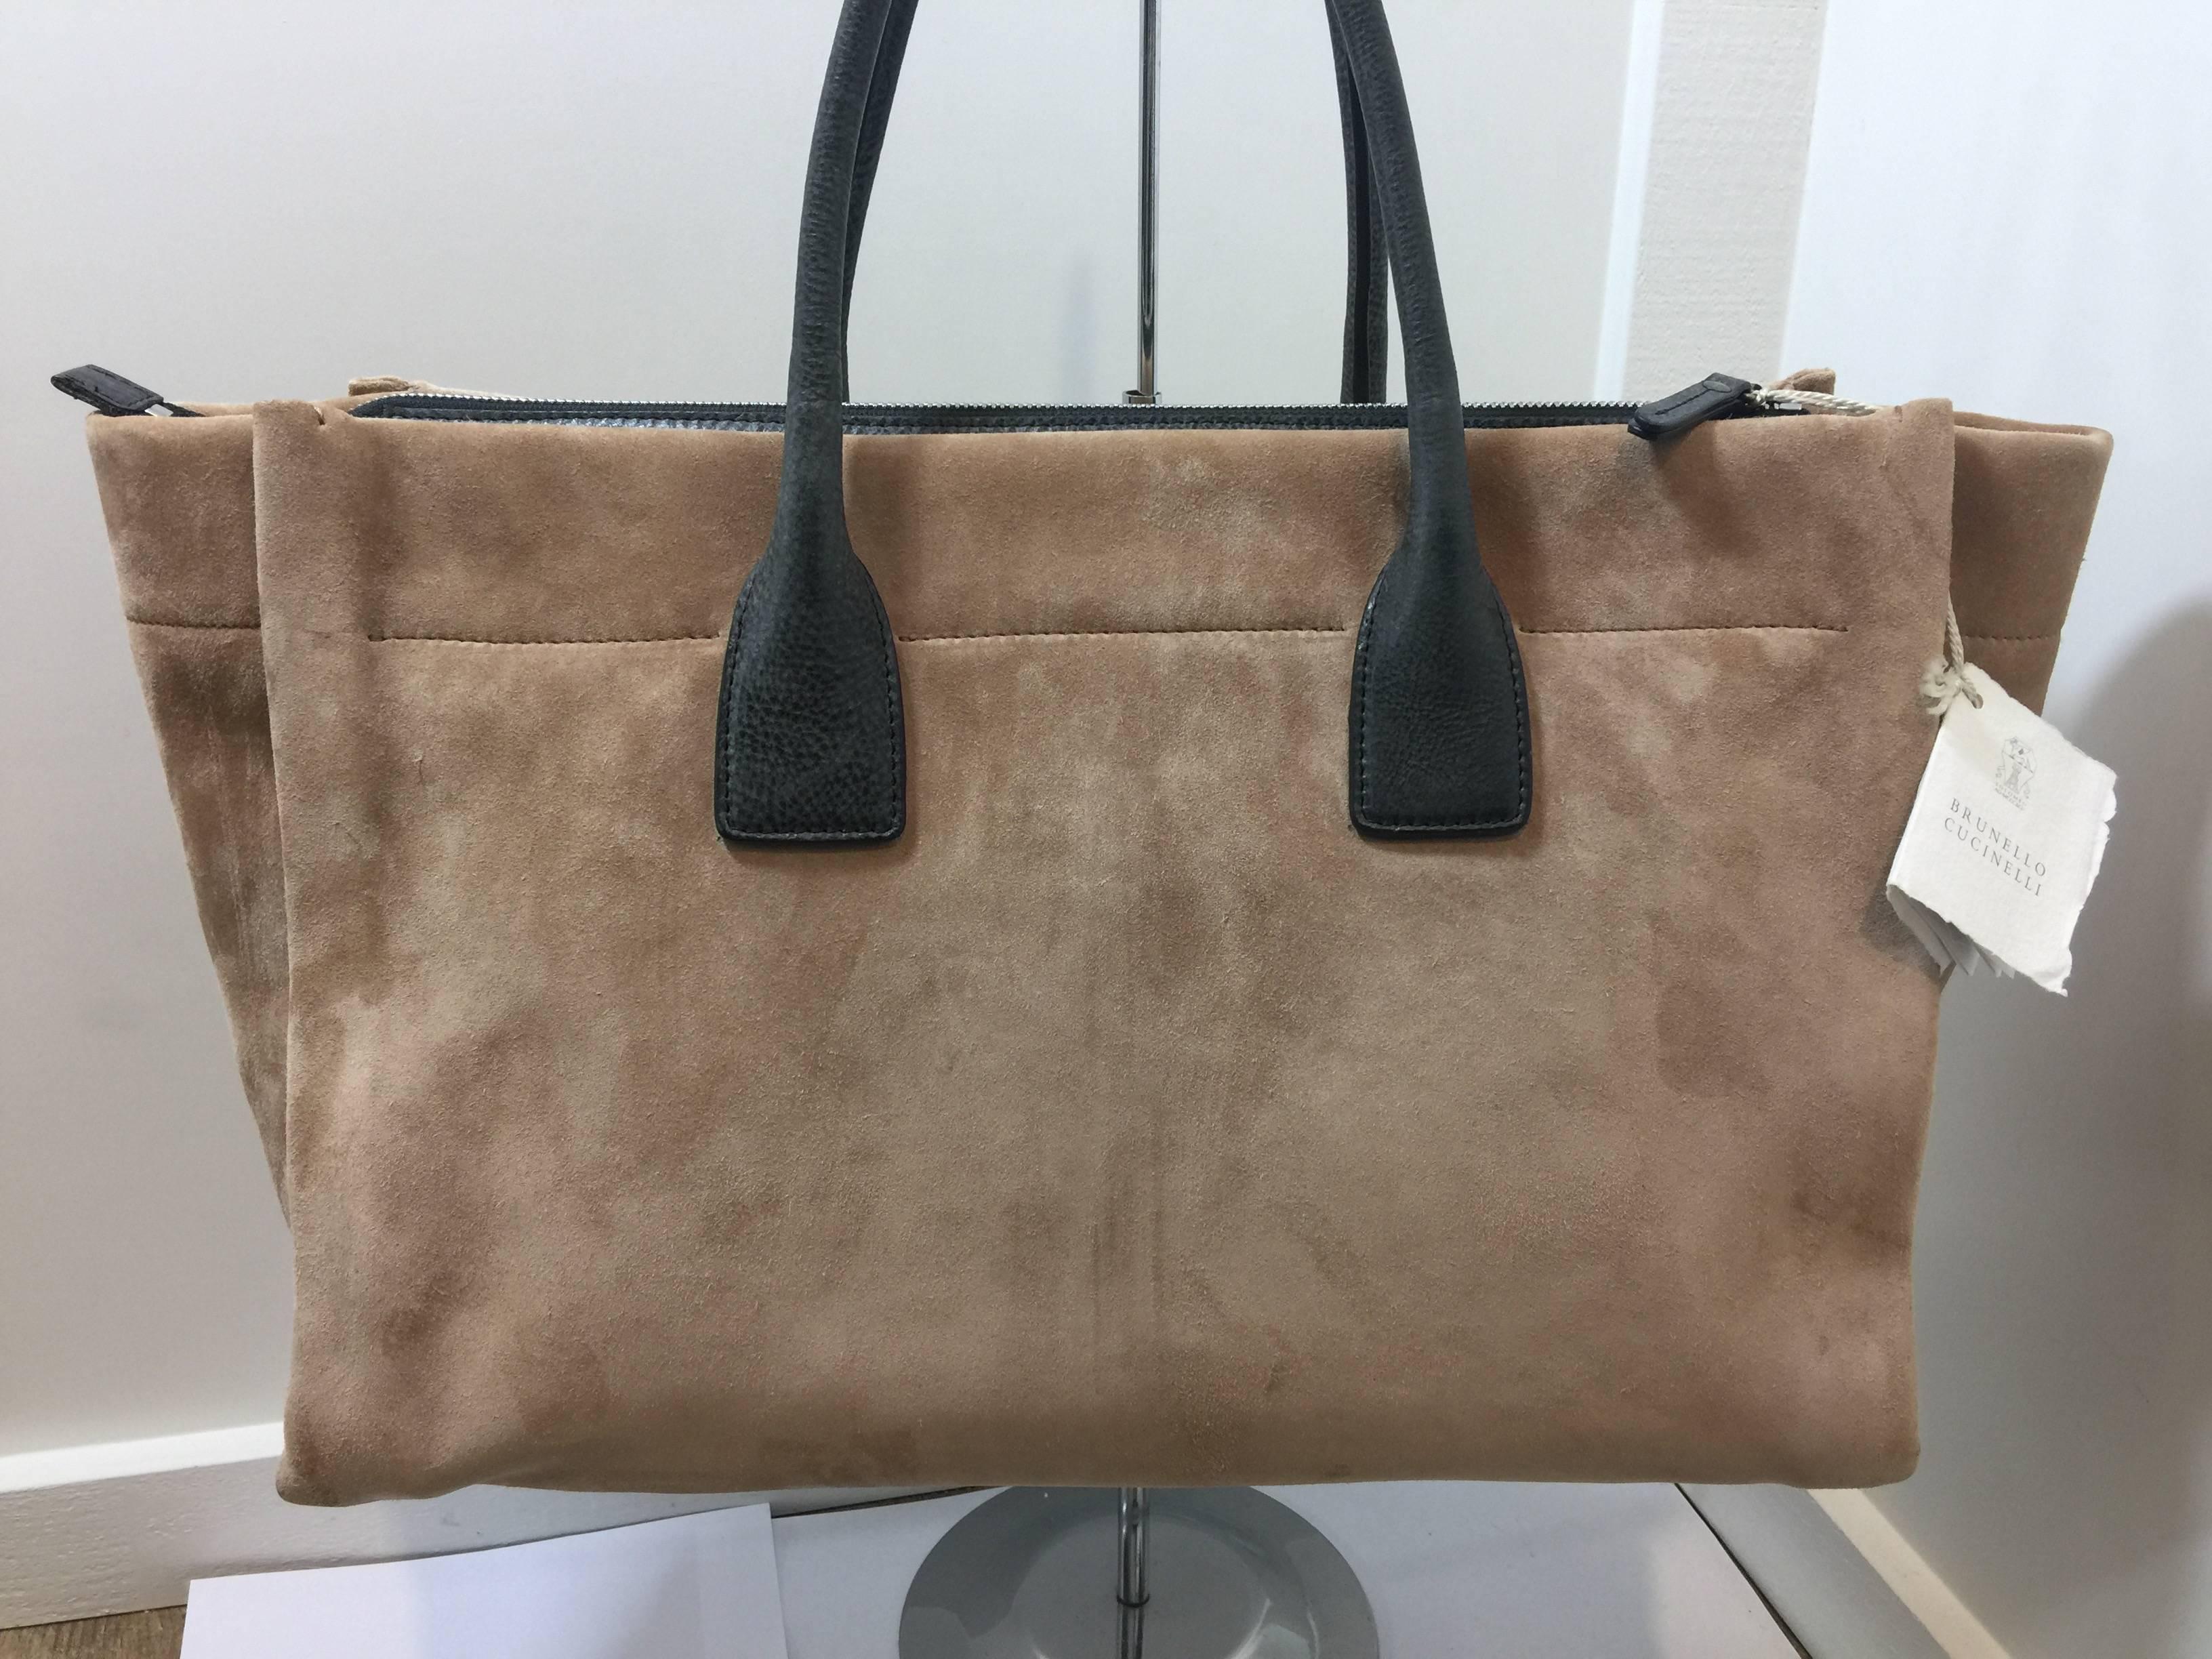 Large Brunello Cucinelli Butter Soft Suede and Leather Tote

Dark grayish brown textured leather tote handles, bottom panel and interior. Zipper top for security. One inside pocket with zipper and 2 open inside pockets. Metal feet at bottom. Very